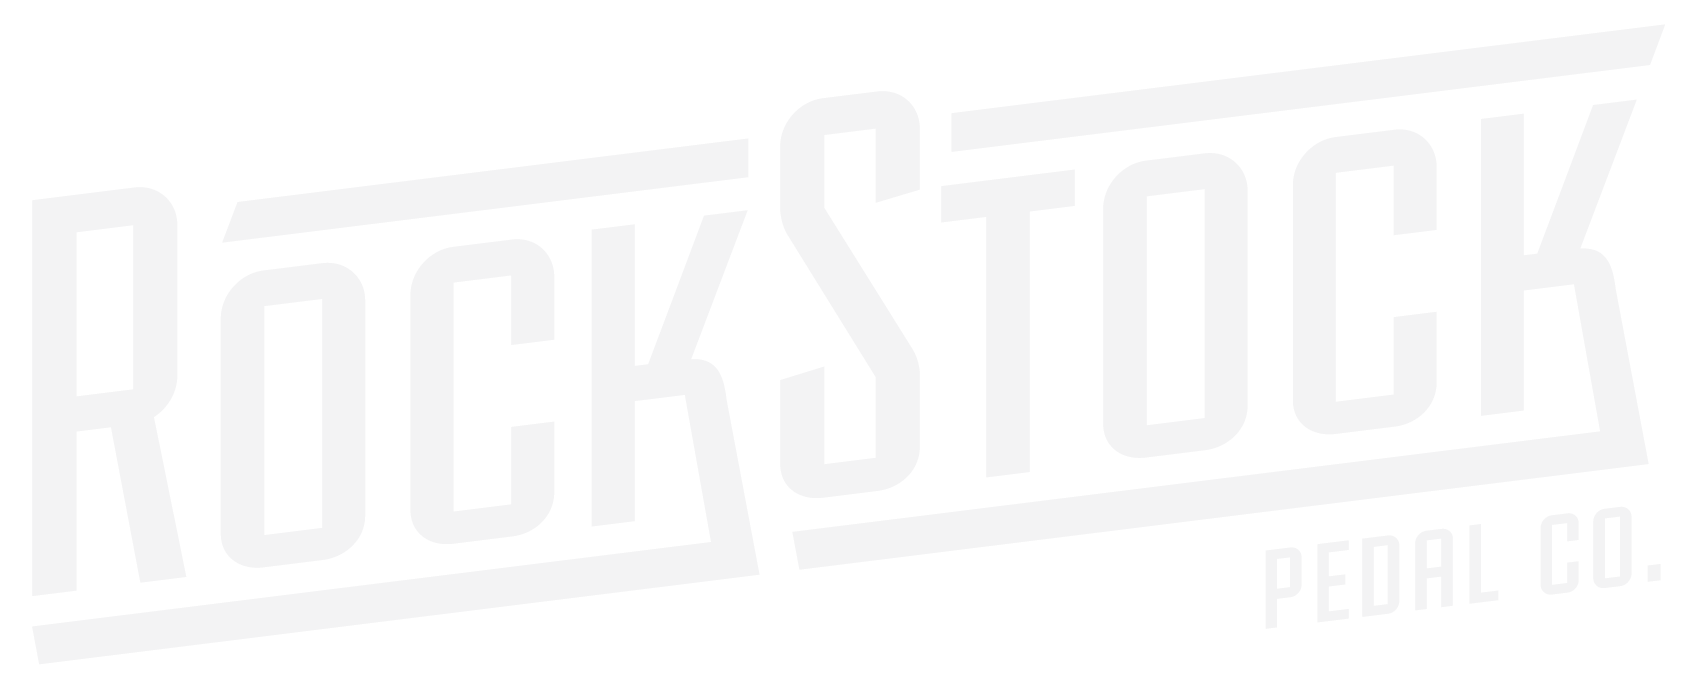 LED Lamp - rockstockpedals